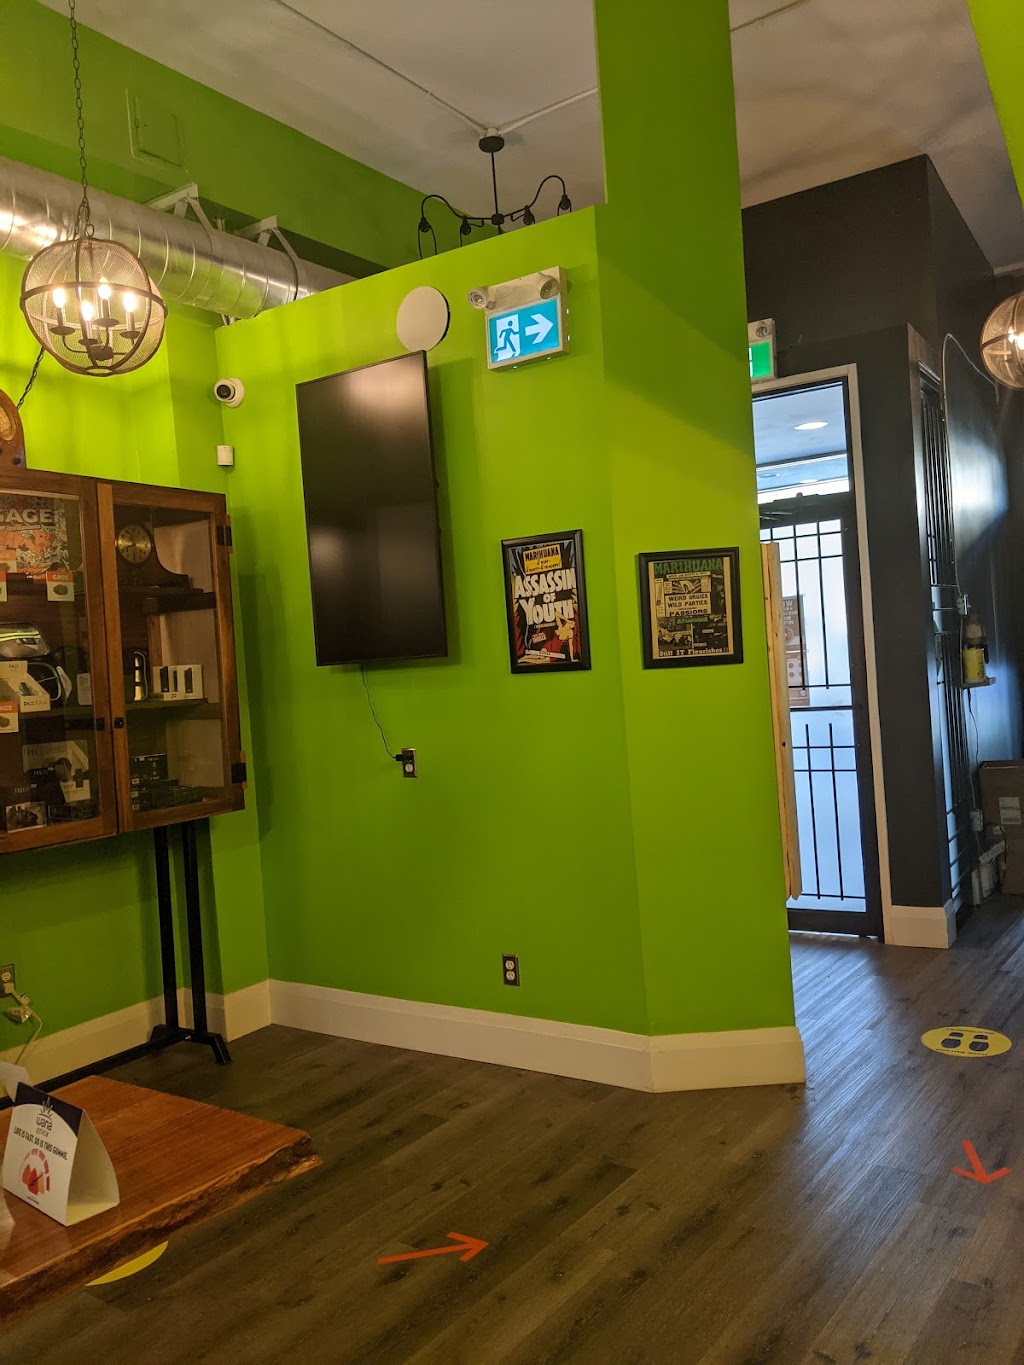 Speakeasy Cannabis Bowmanville / Clarington | store | 21 King St W, Bowmanville, ON L1C 1R2, Canada | 9056233966 OR +1 905-623-3966